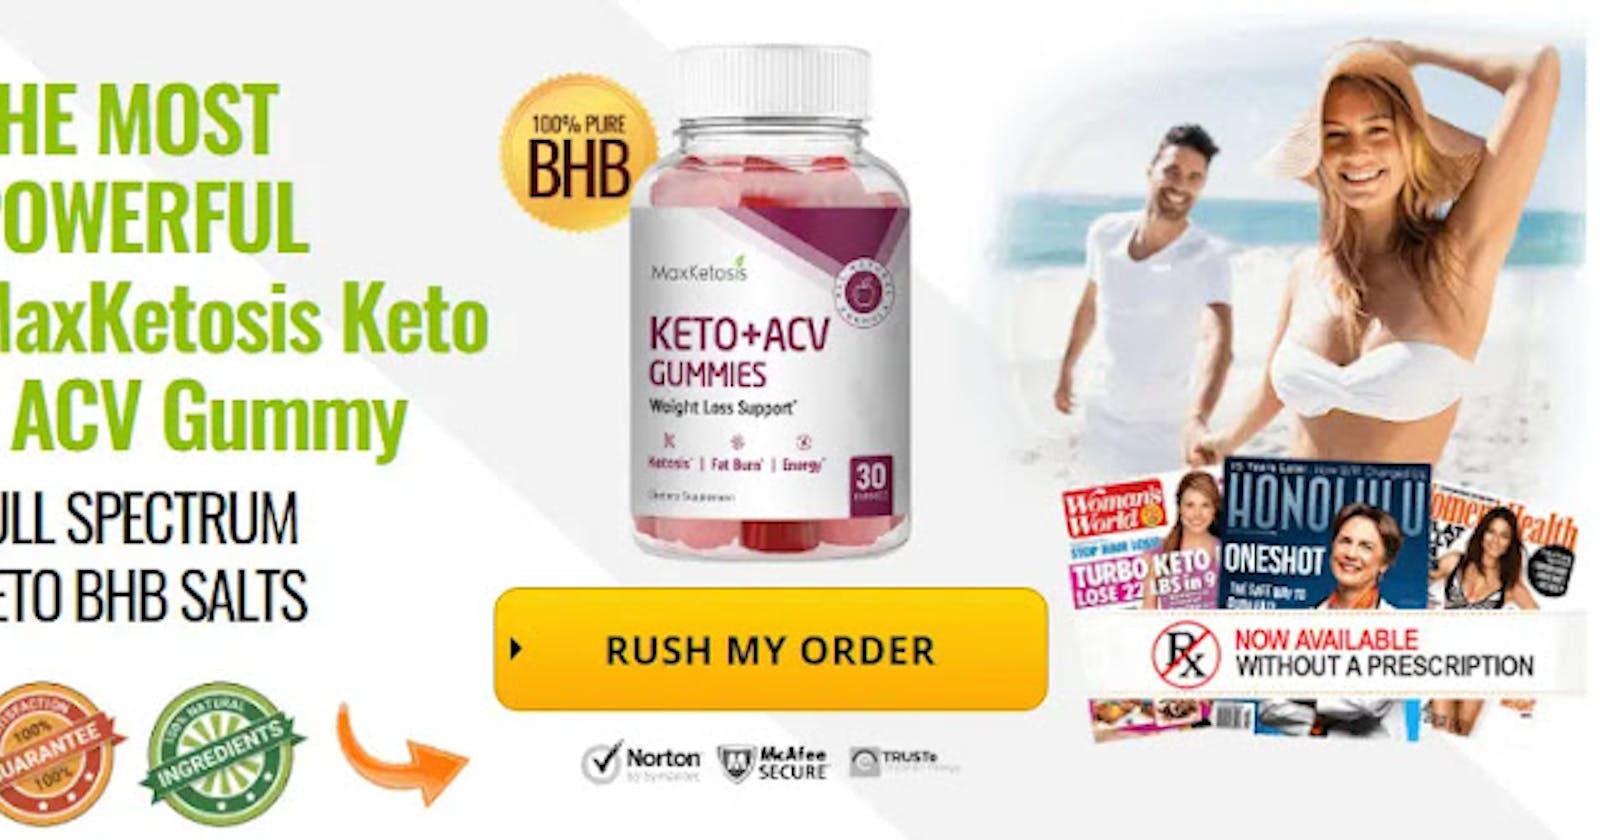 Max Ketosis Keto + ACV Gummies Reviews it is Scam Or Legit? Price & Where To Buy?